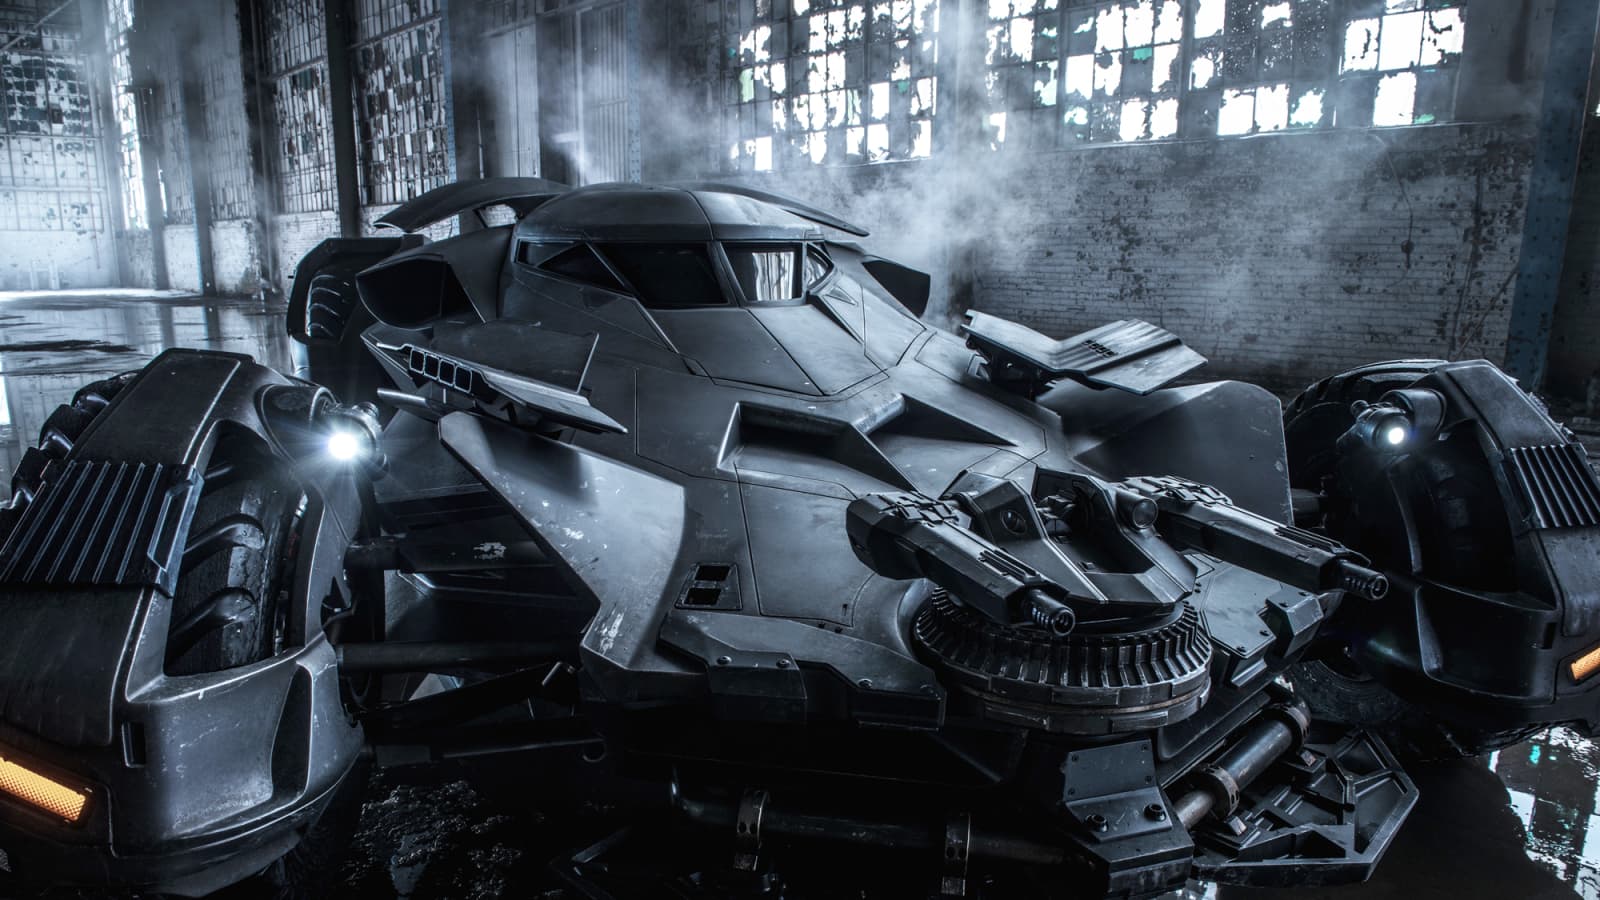 New Batman movie: Want your own Batmobile? Here's what it costs